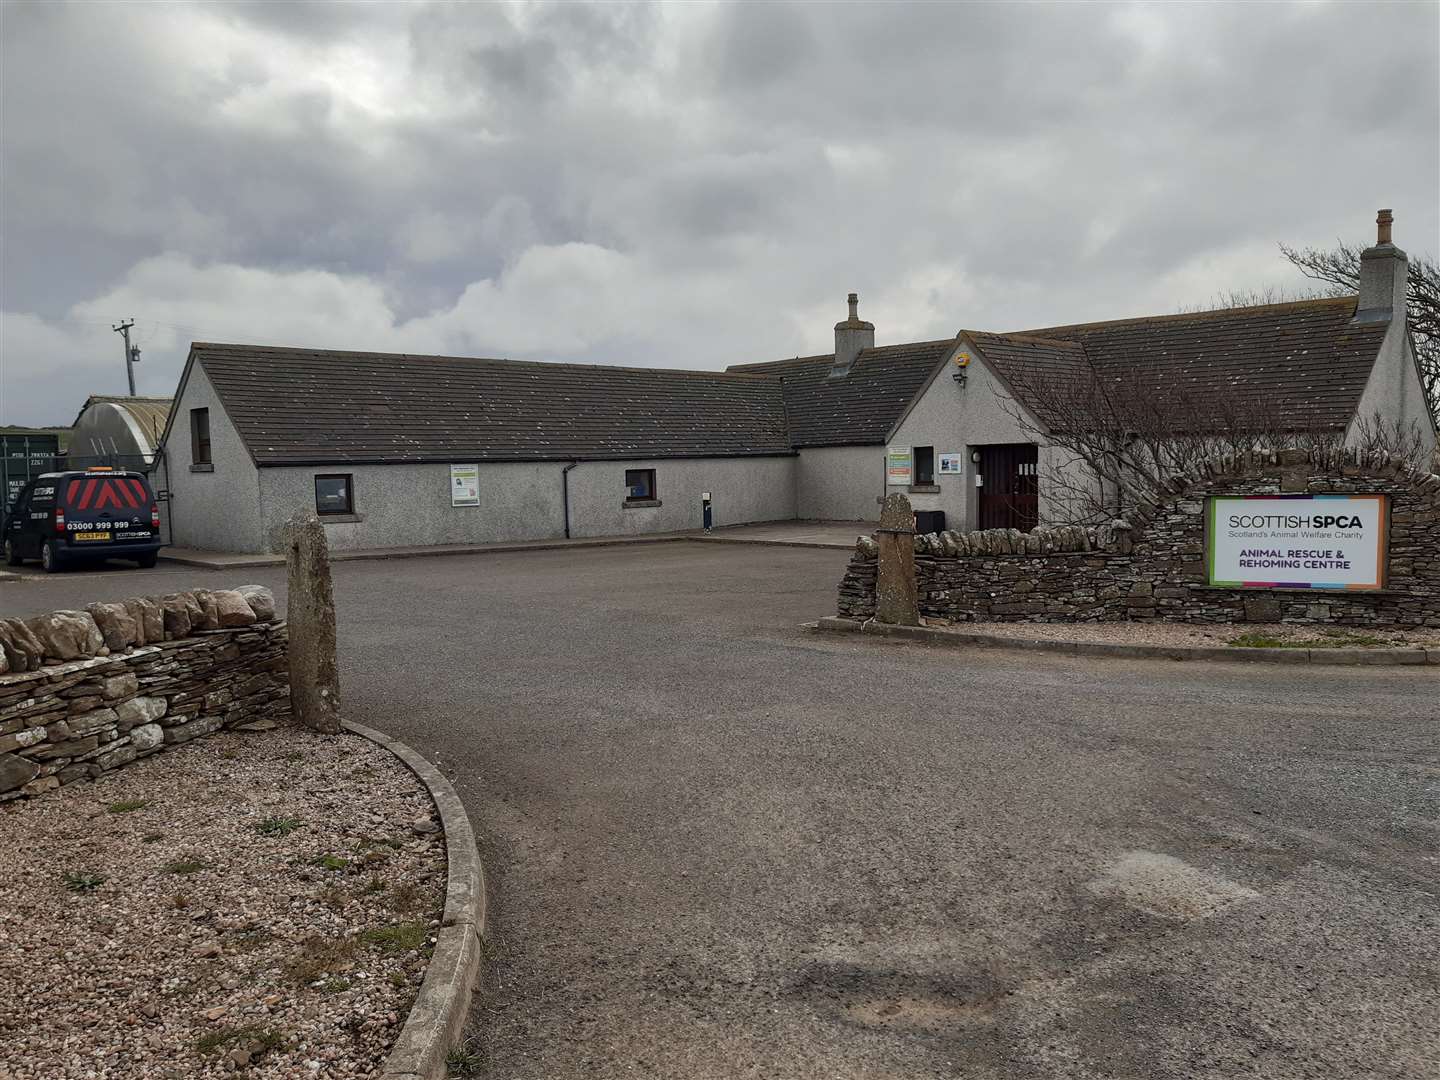 The Scottish SPCA centre for Caithness and Sutherland at Balmore will close at the end of October, the charity said.